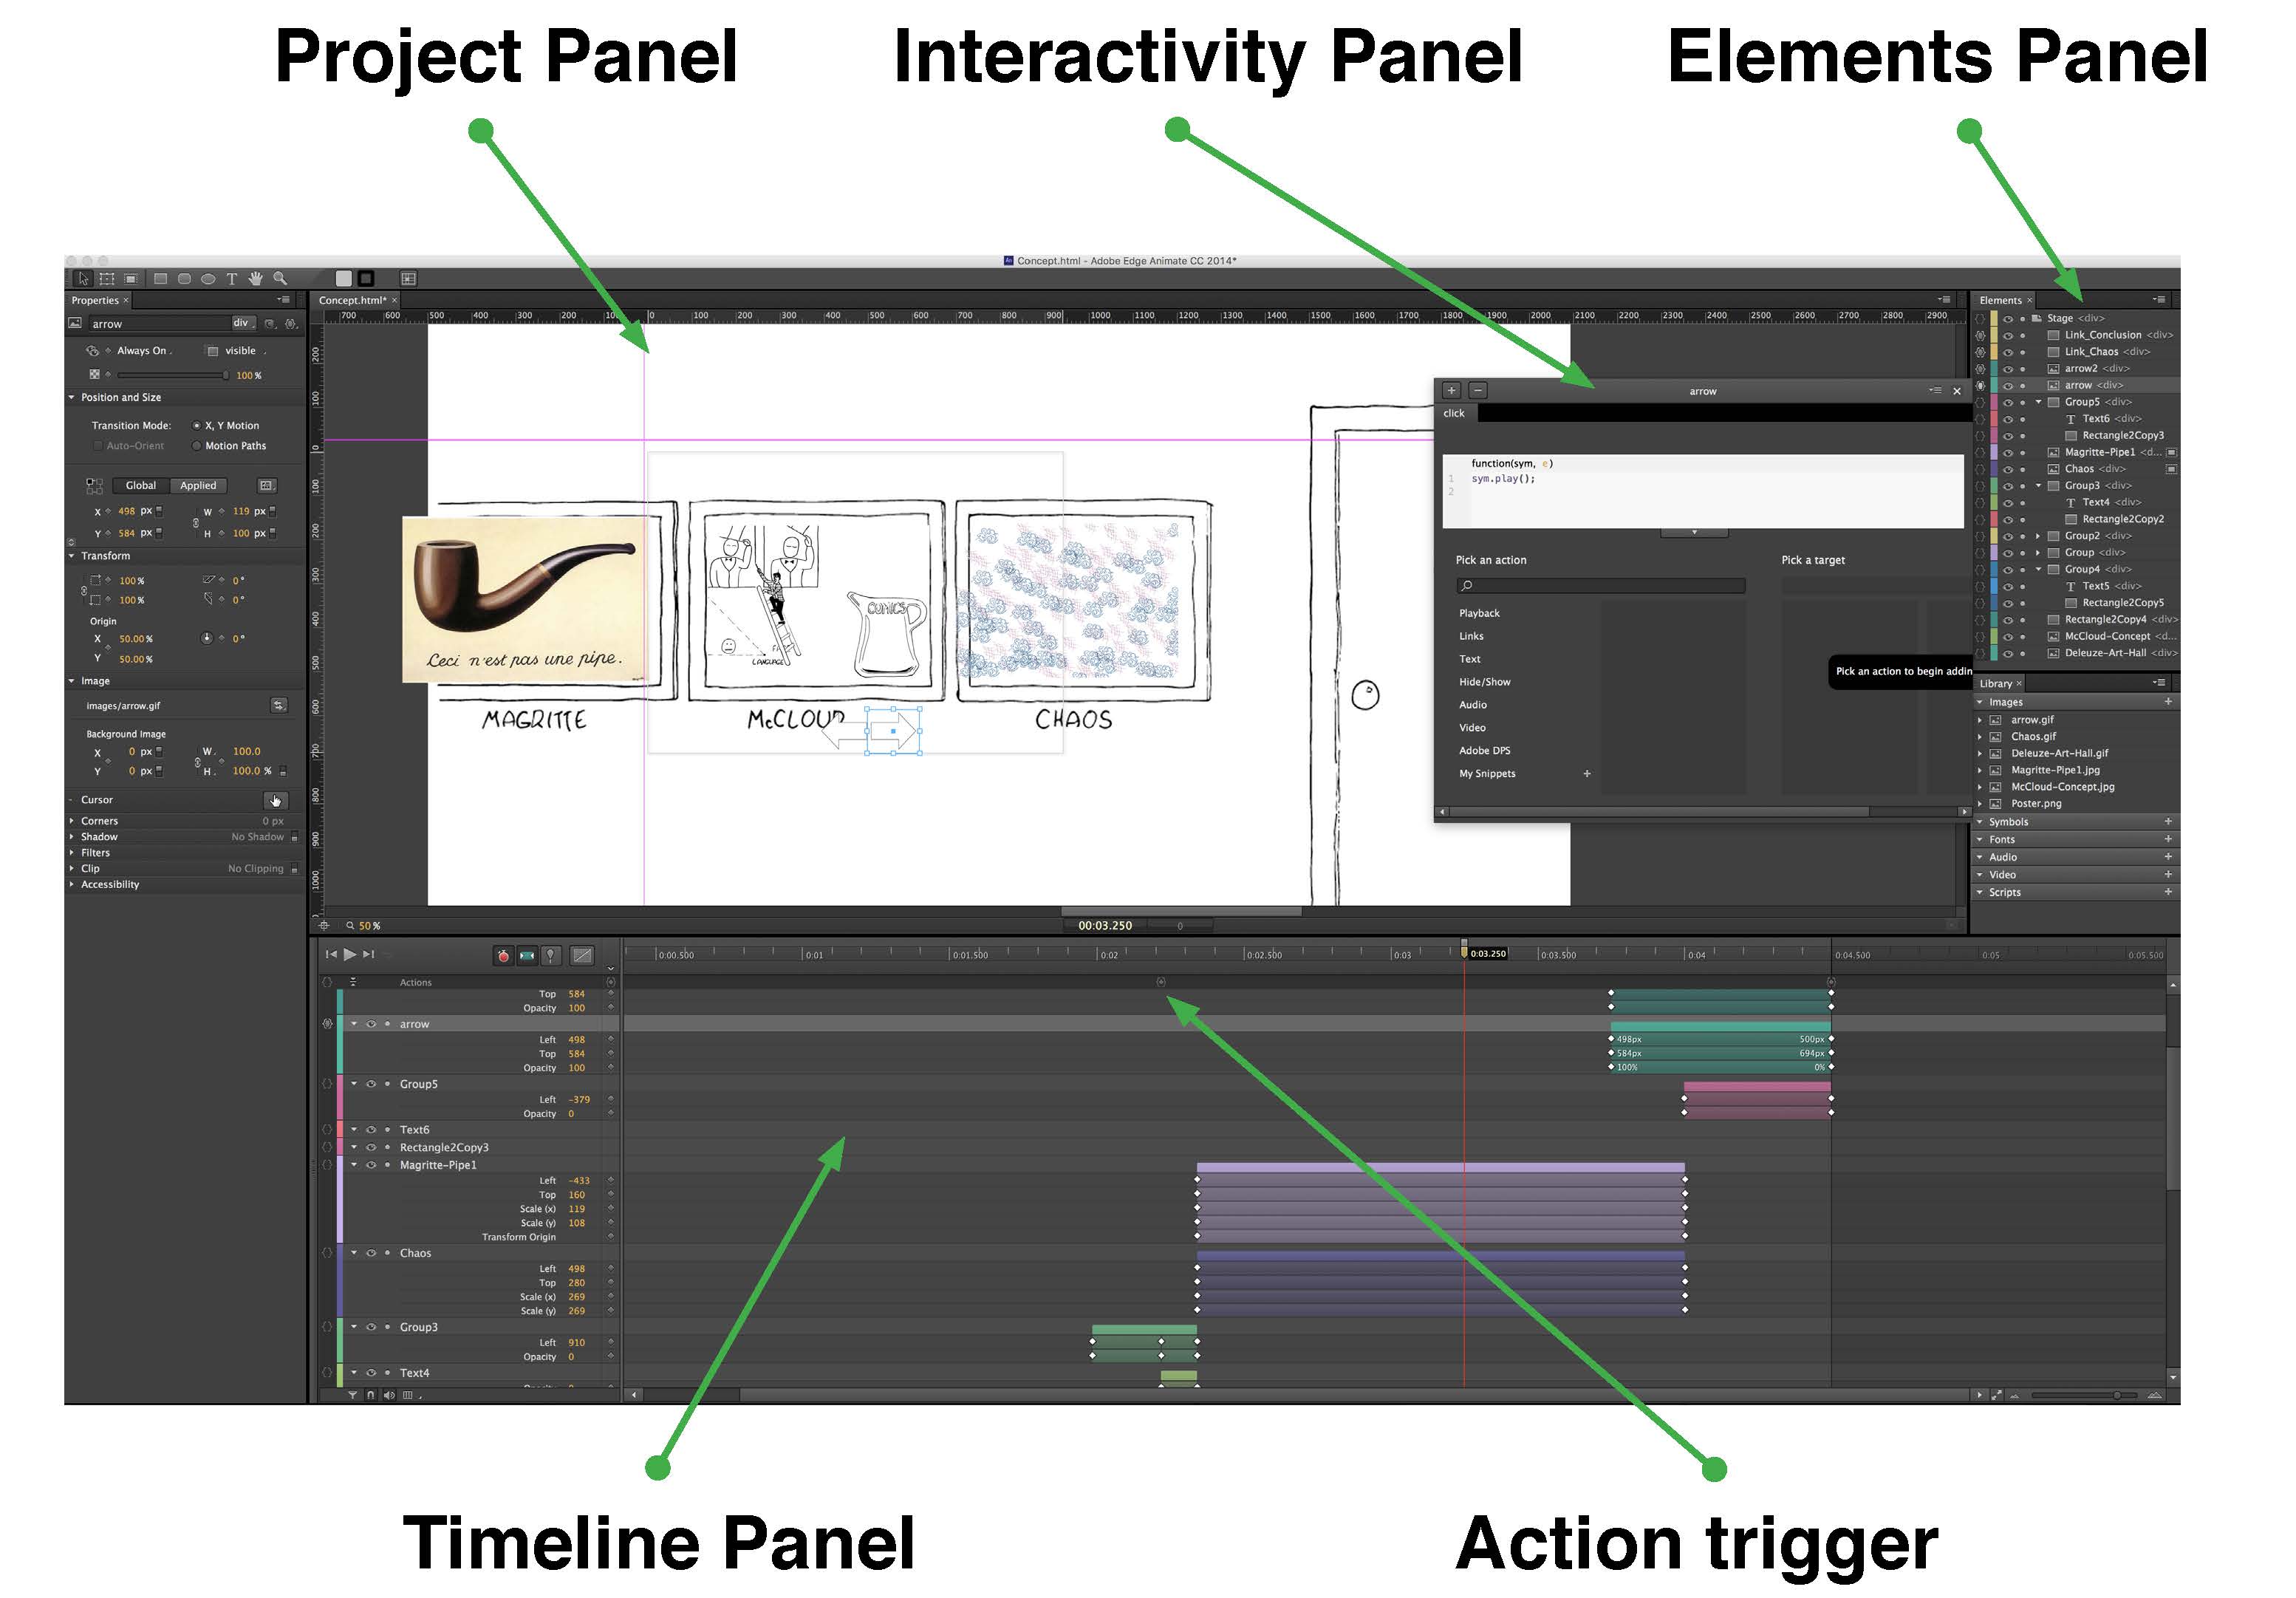 Adobe Edge Animate workspace with Project Panel, Interactivity Panel, Elements Panel, Timeline Panel, and Action Trigger labeled